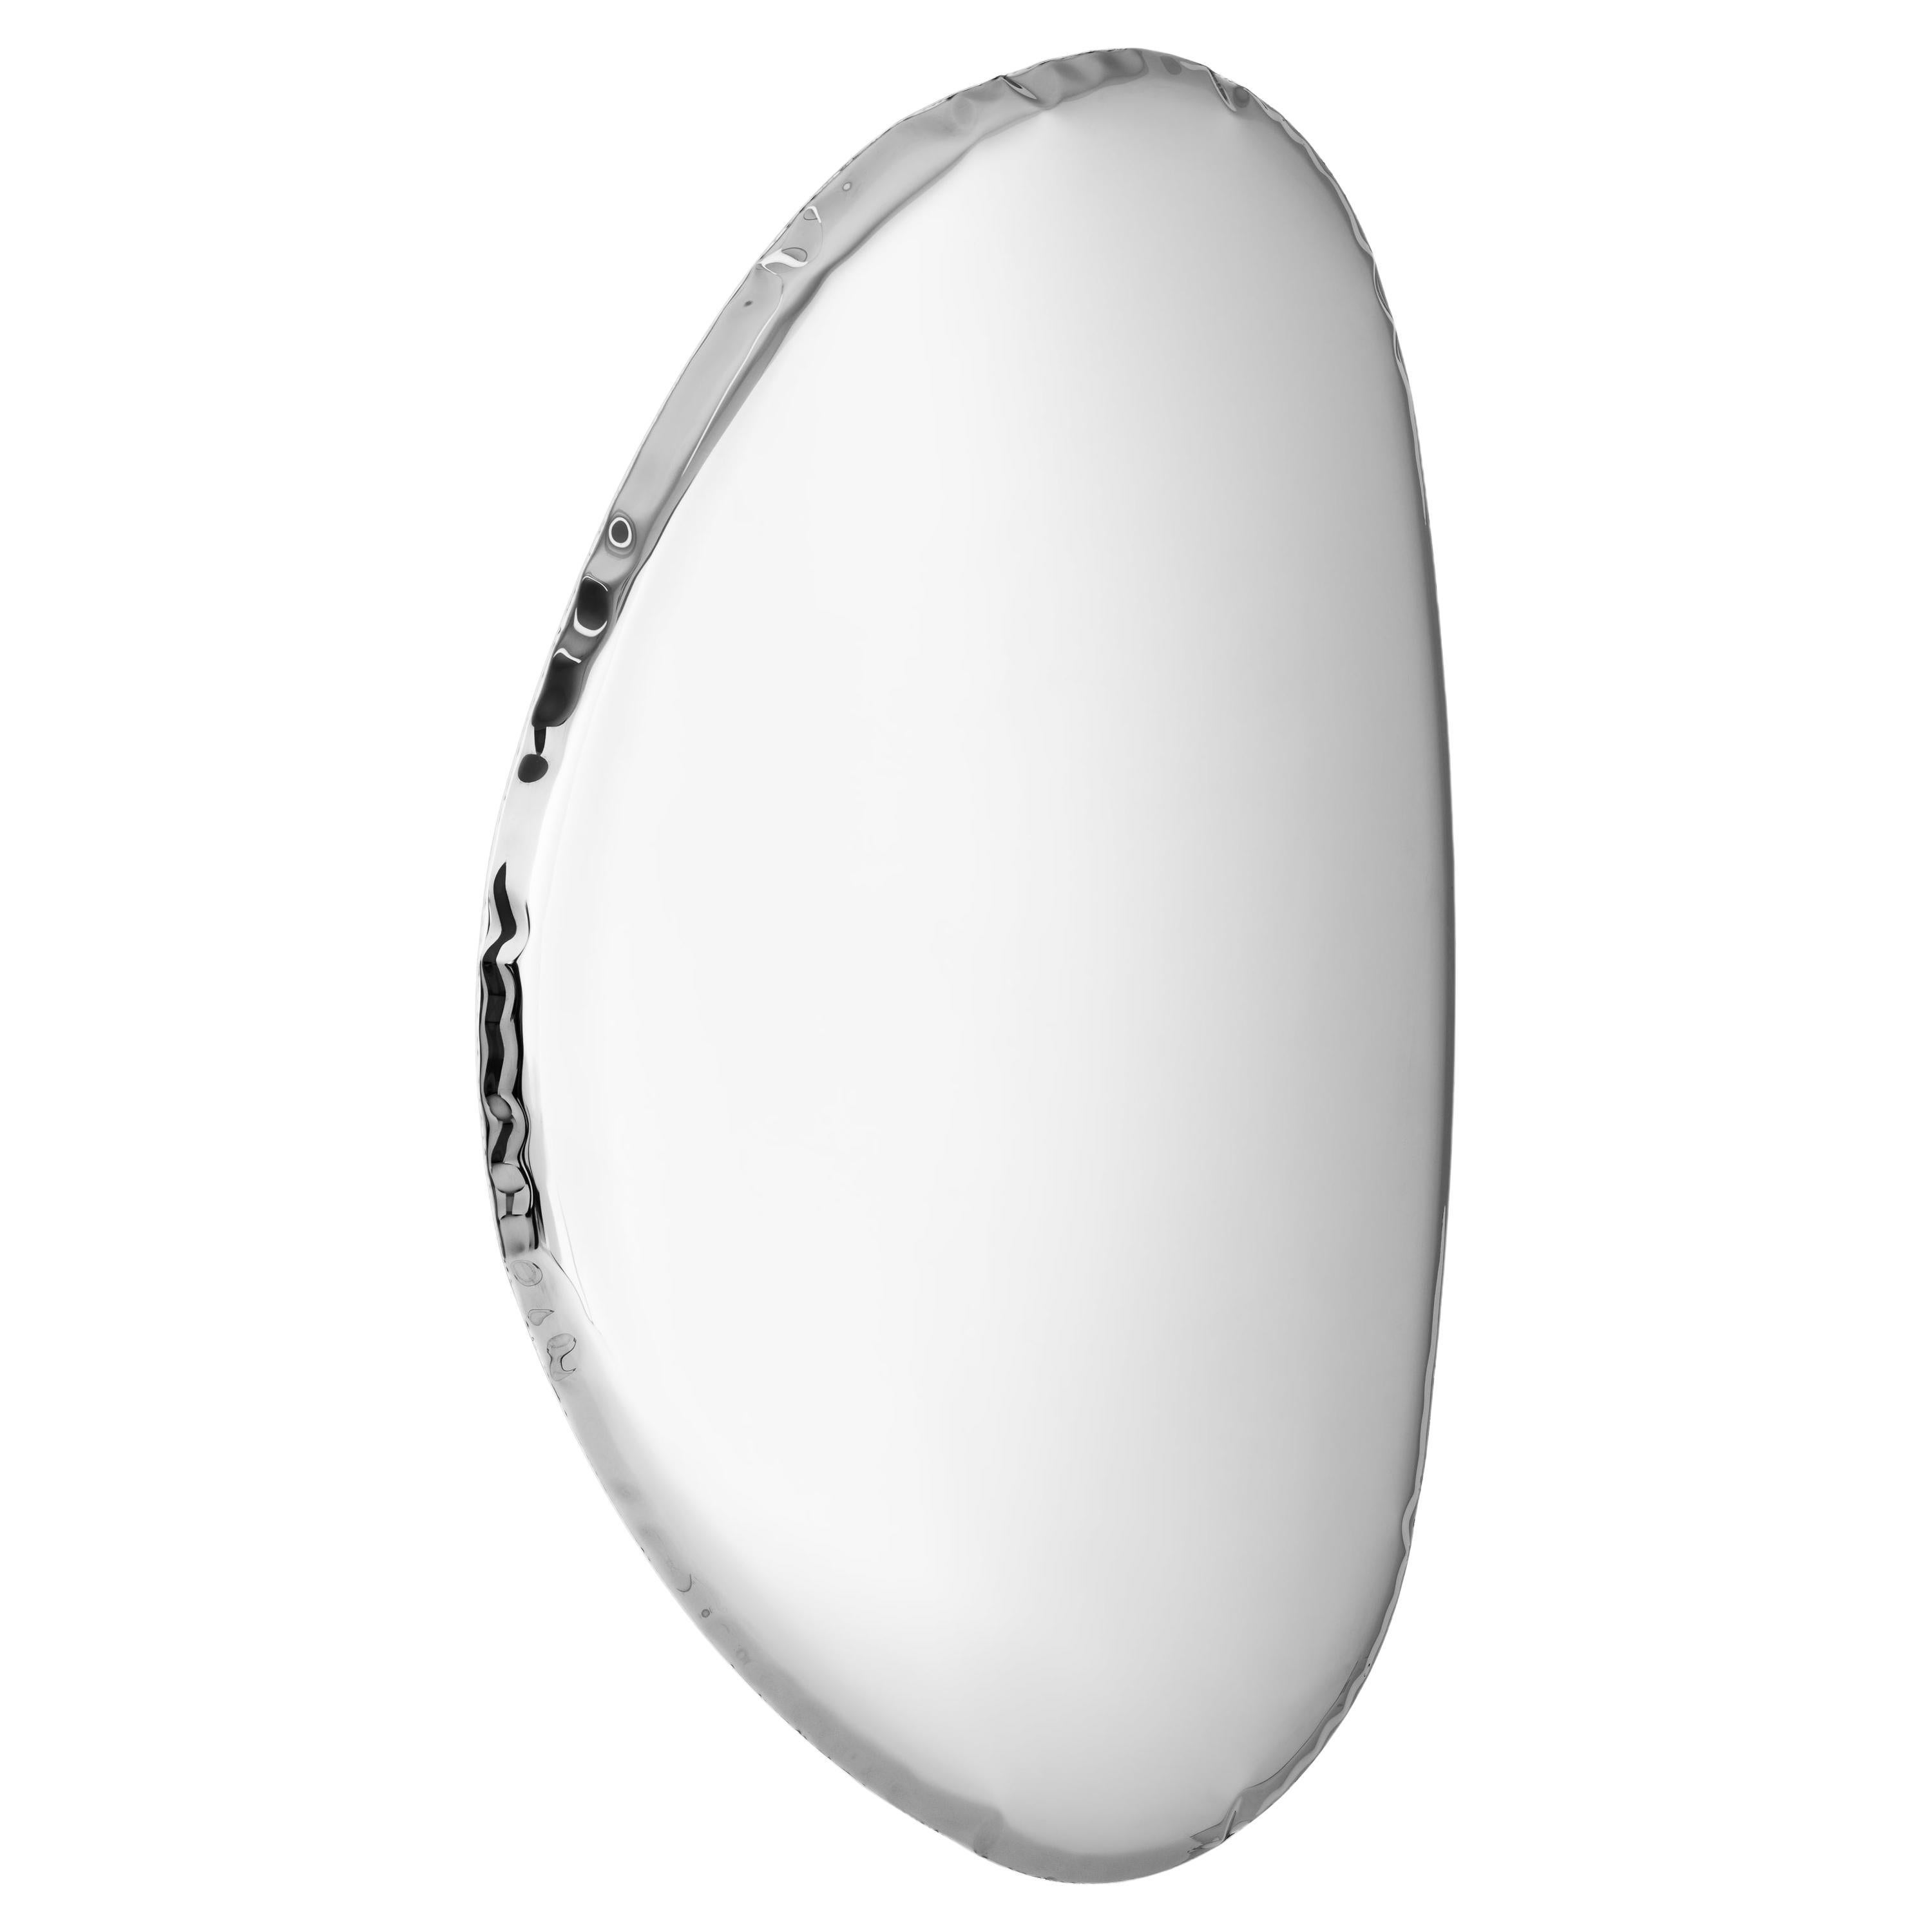 Mirror Tafla O2 in Polished Stainless Steel by Zieta For Sale